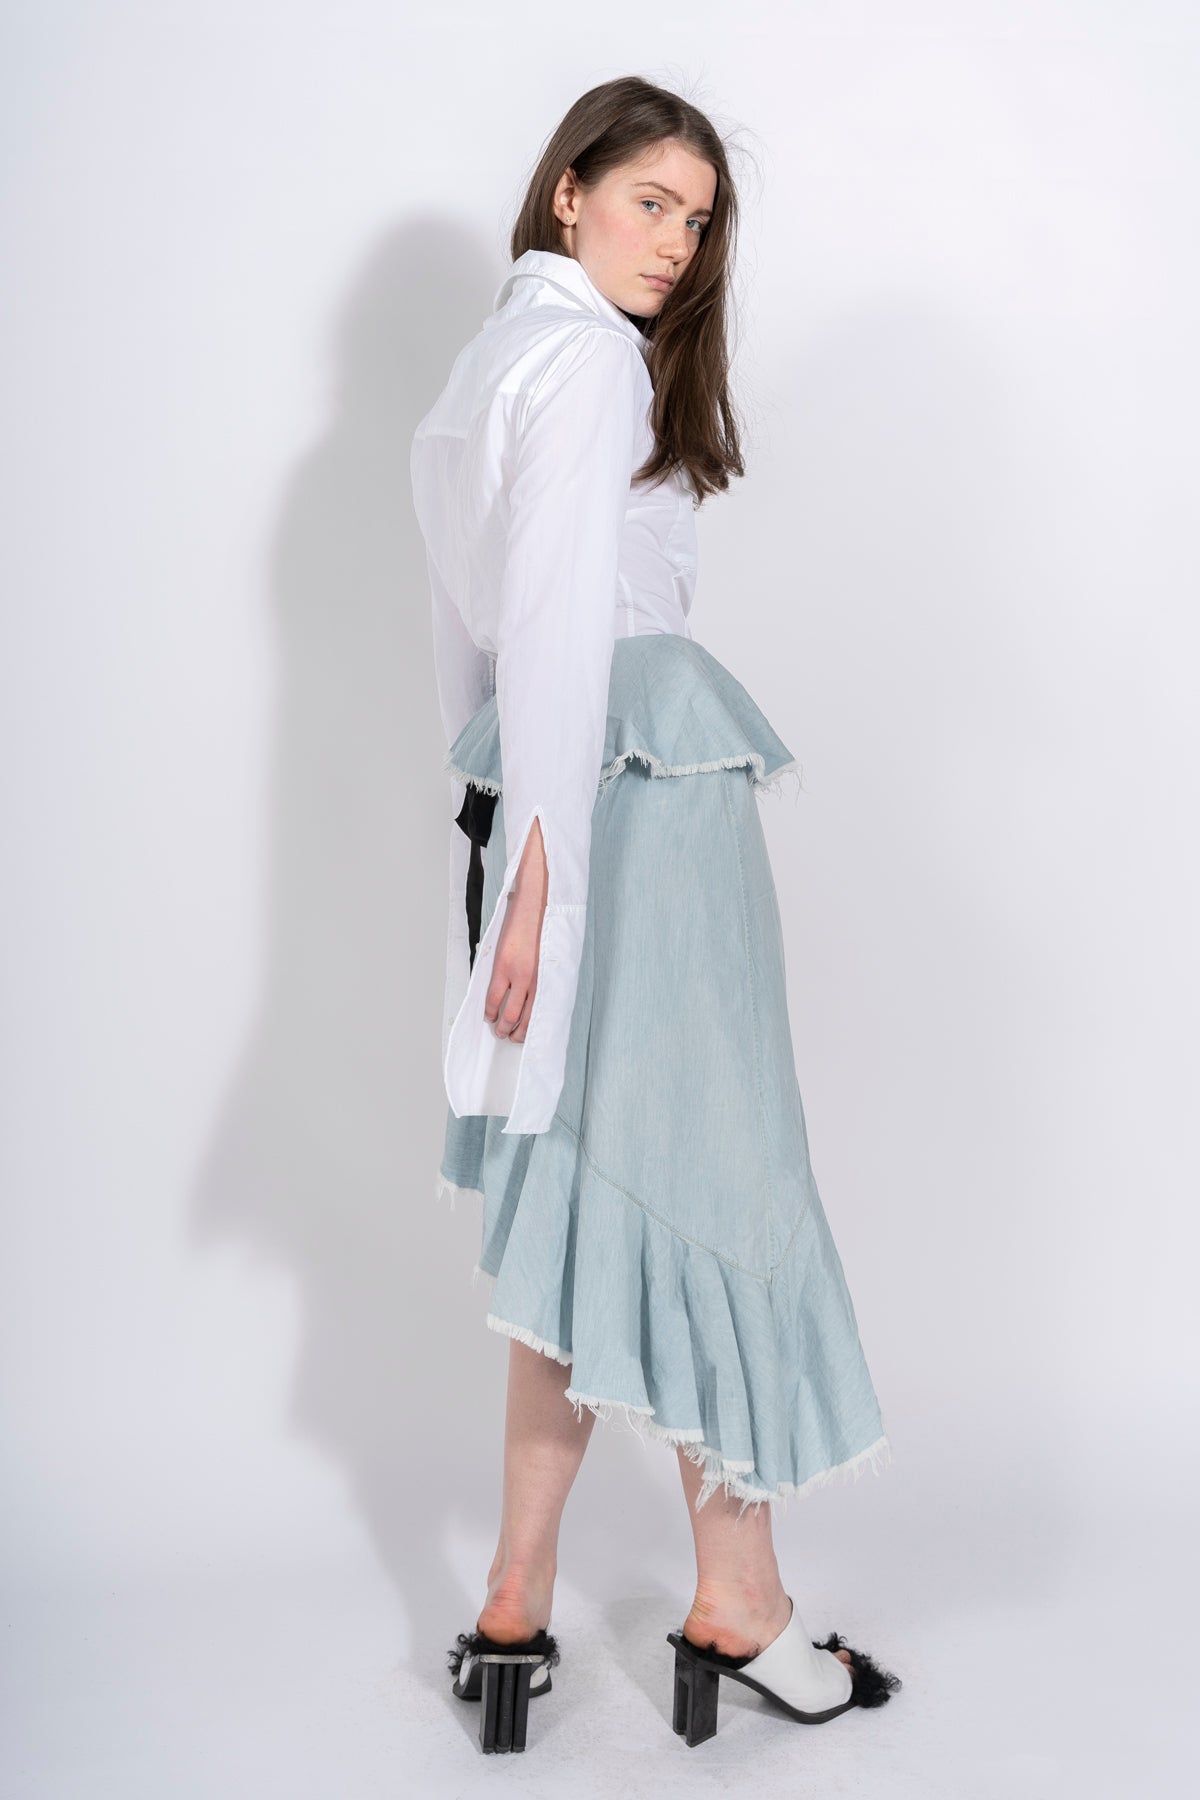 OVERSIZED SHIRT WITH LARGE CUFFS marques almeida